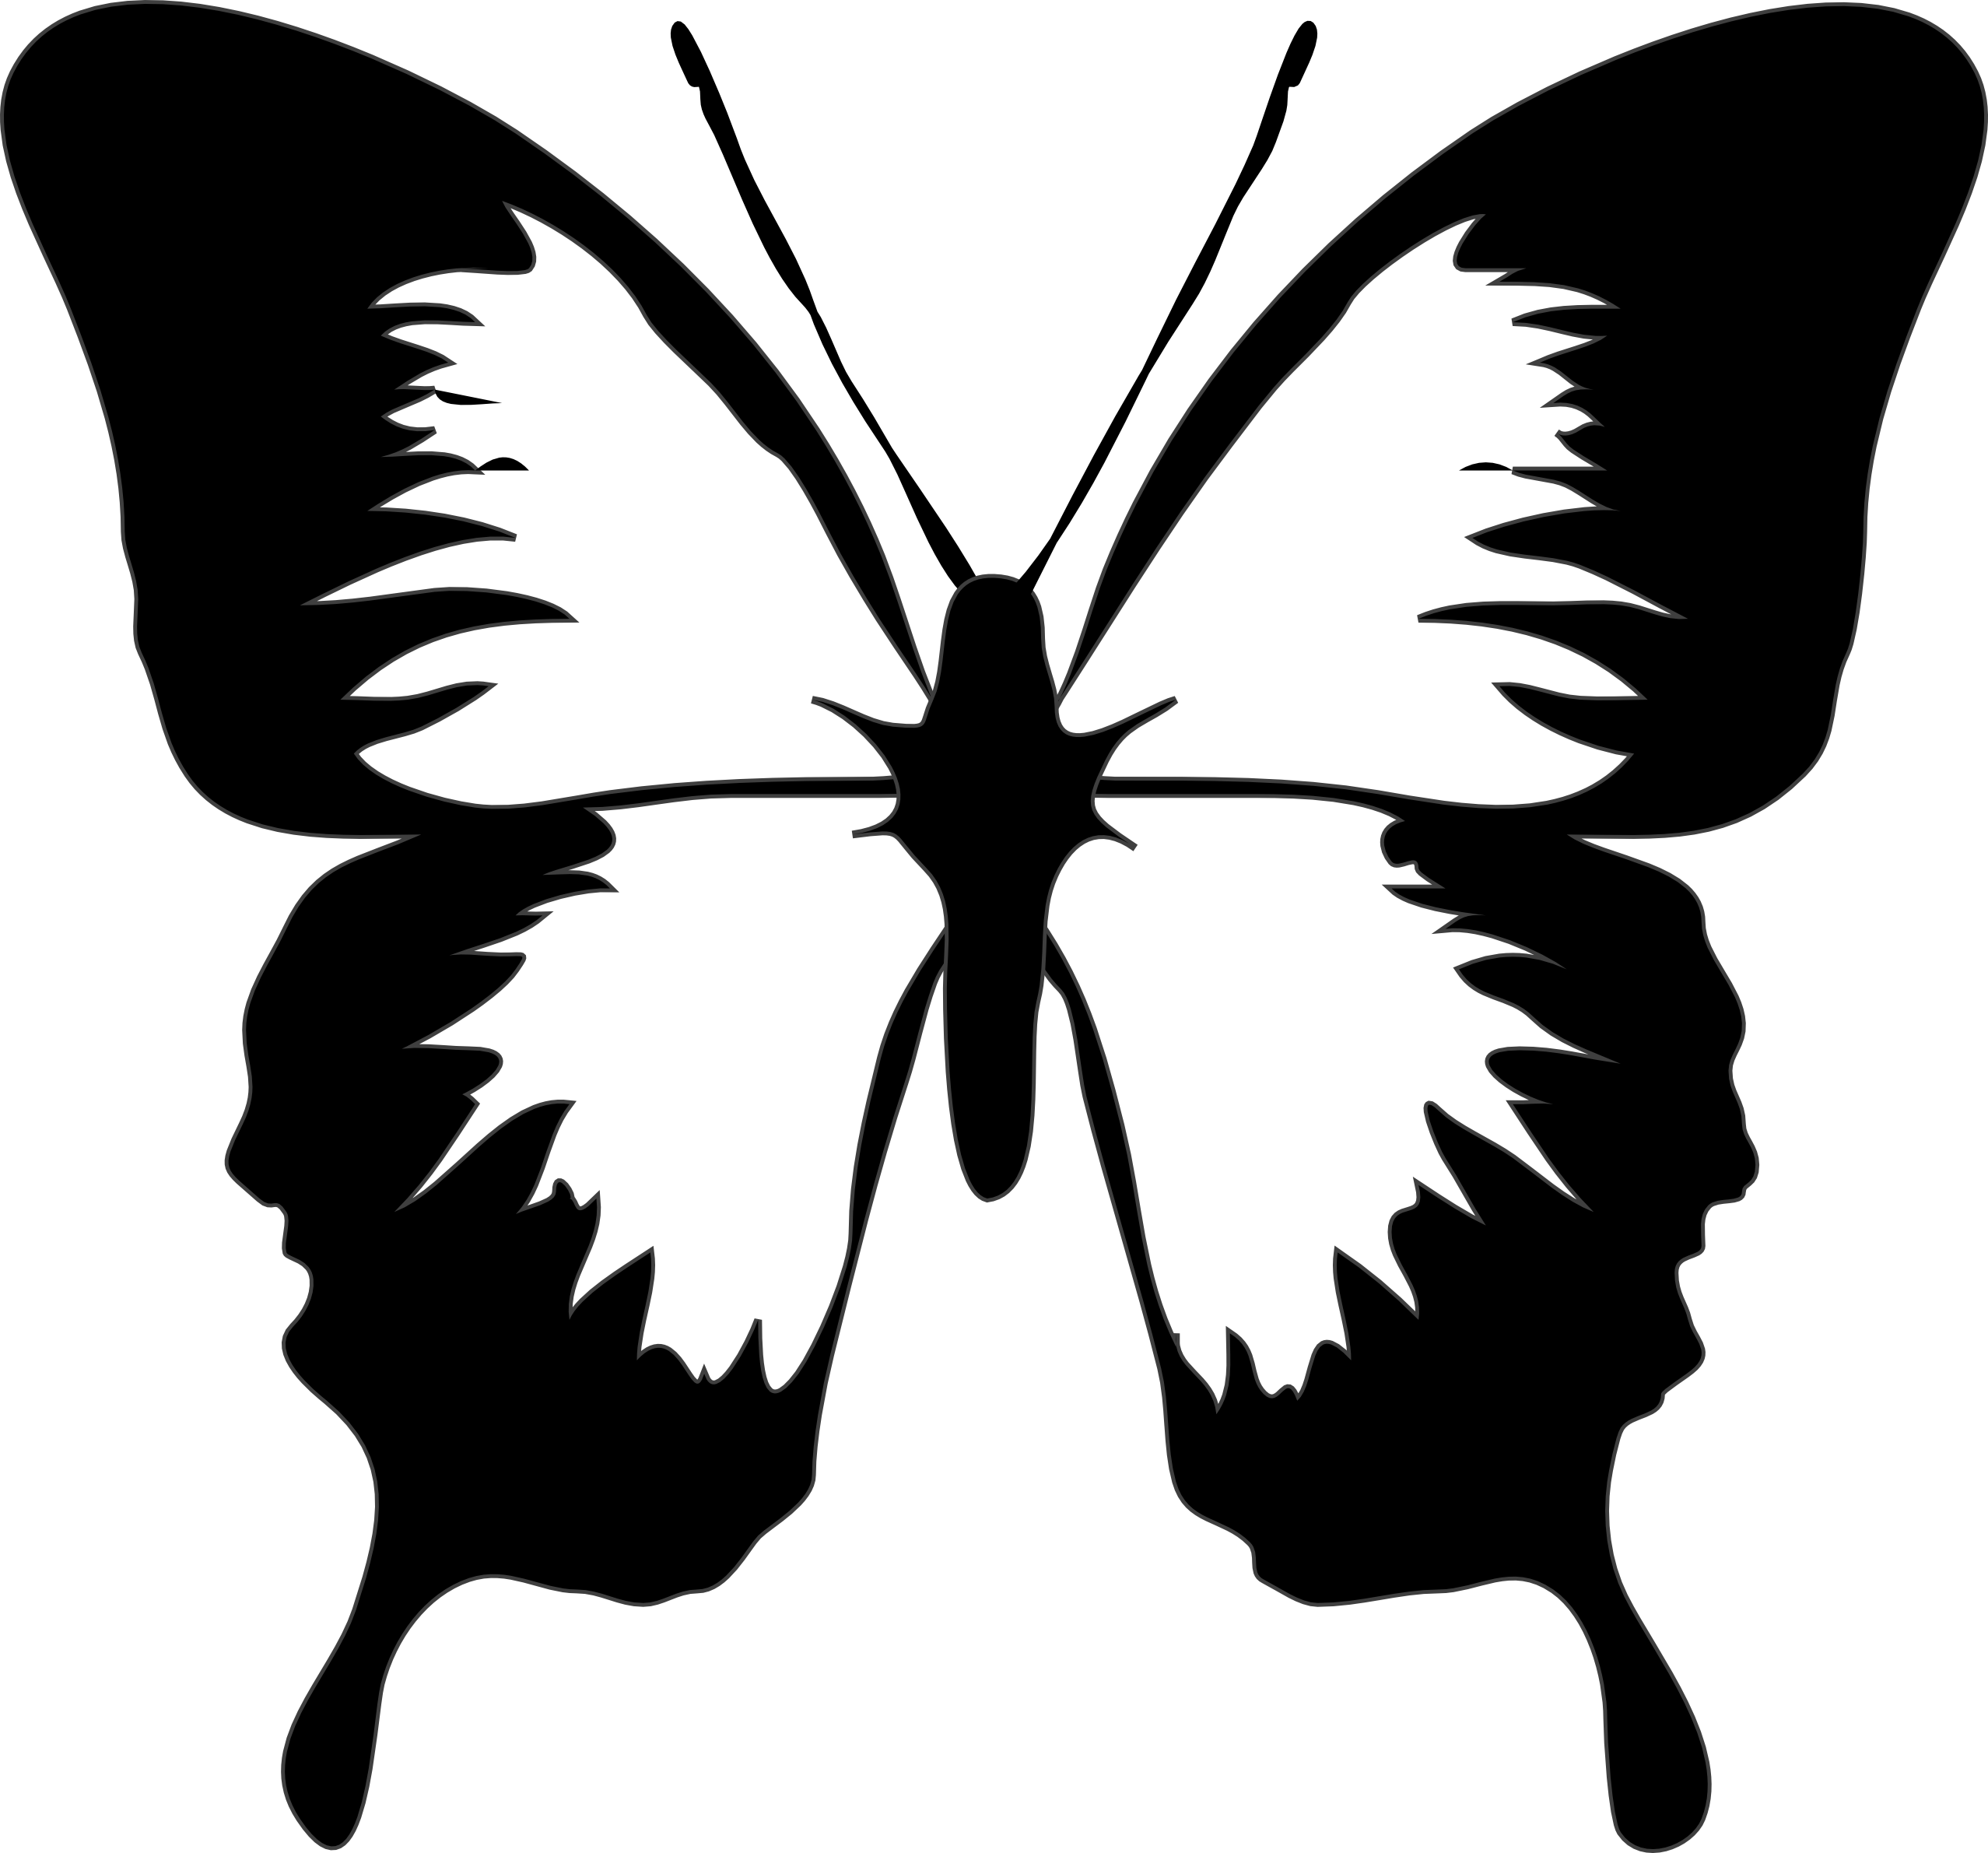 Free Butterfly Lineart, Download Free Butterfly Lineart png images